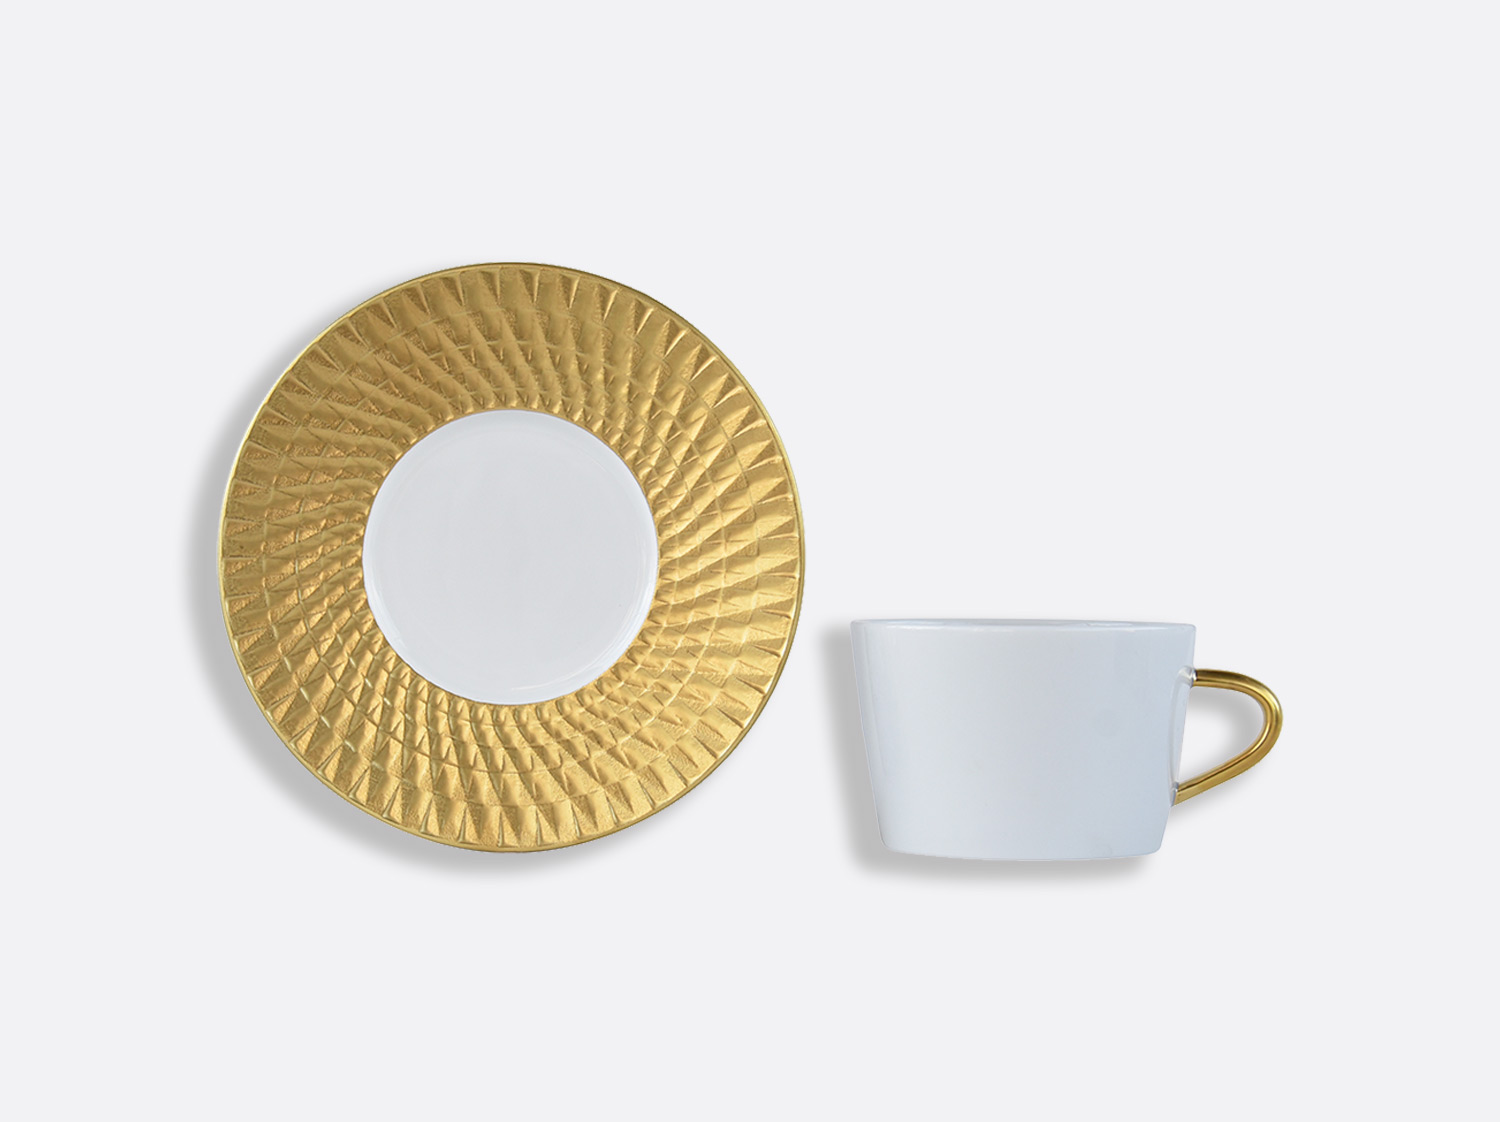 China per unit of the collection Twist or | Bernardaud